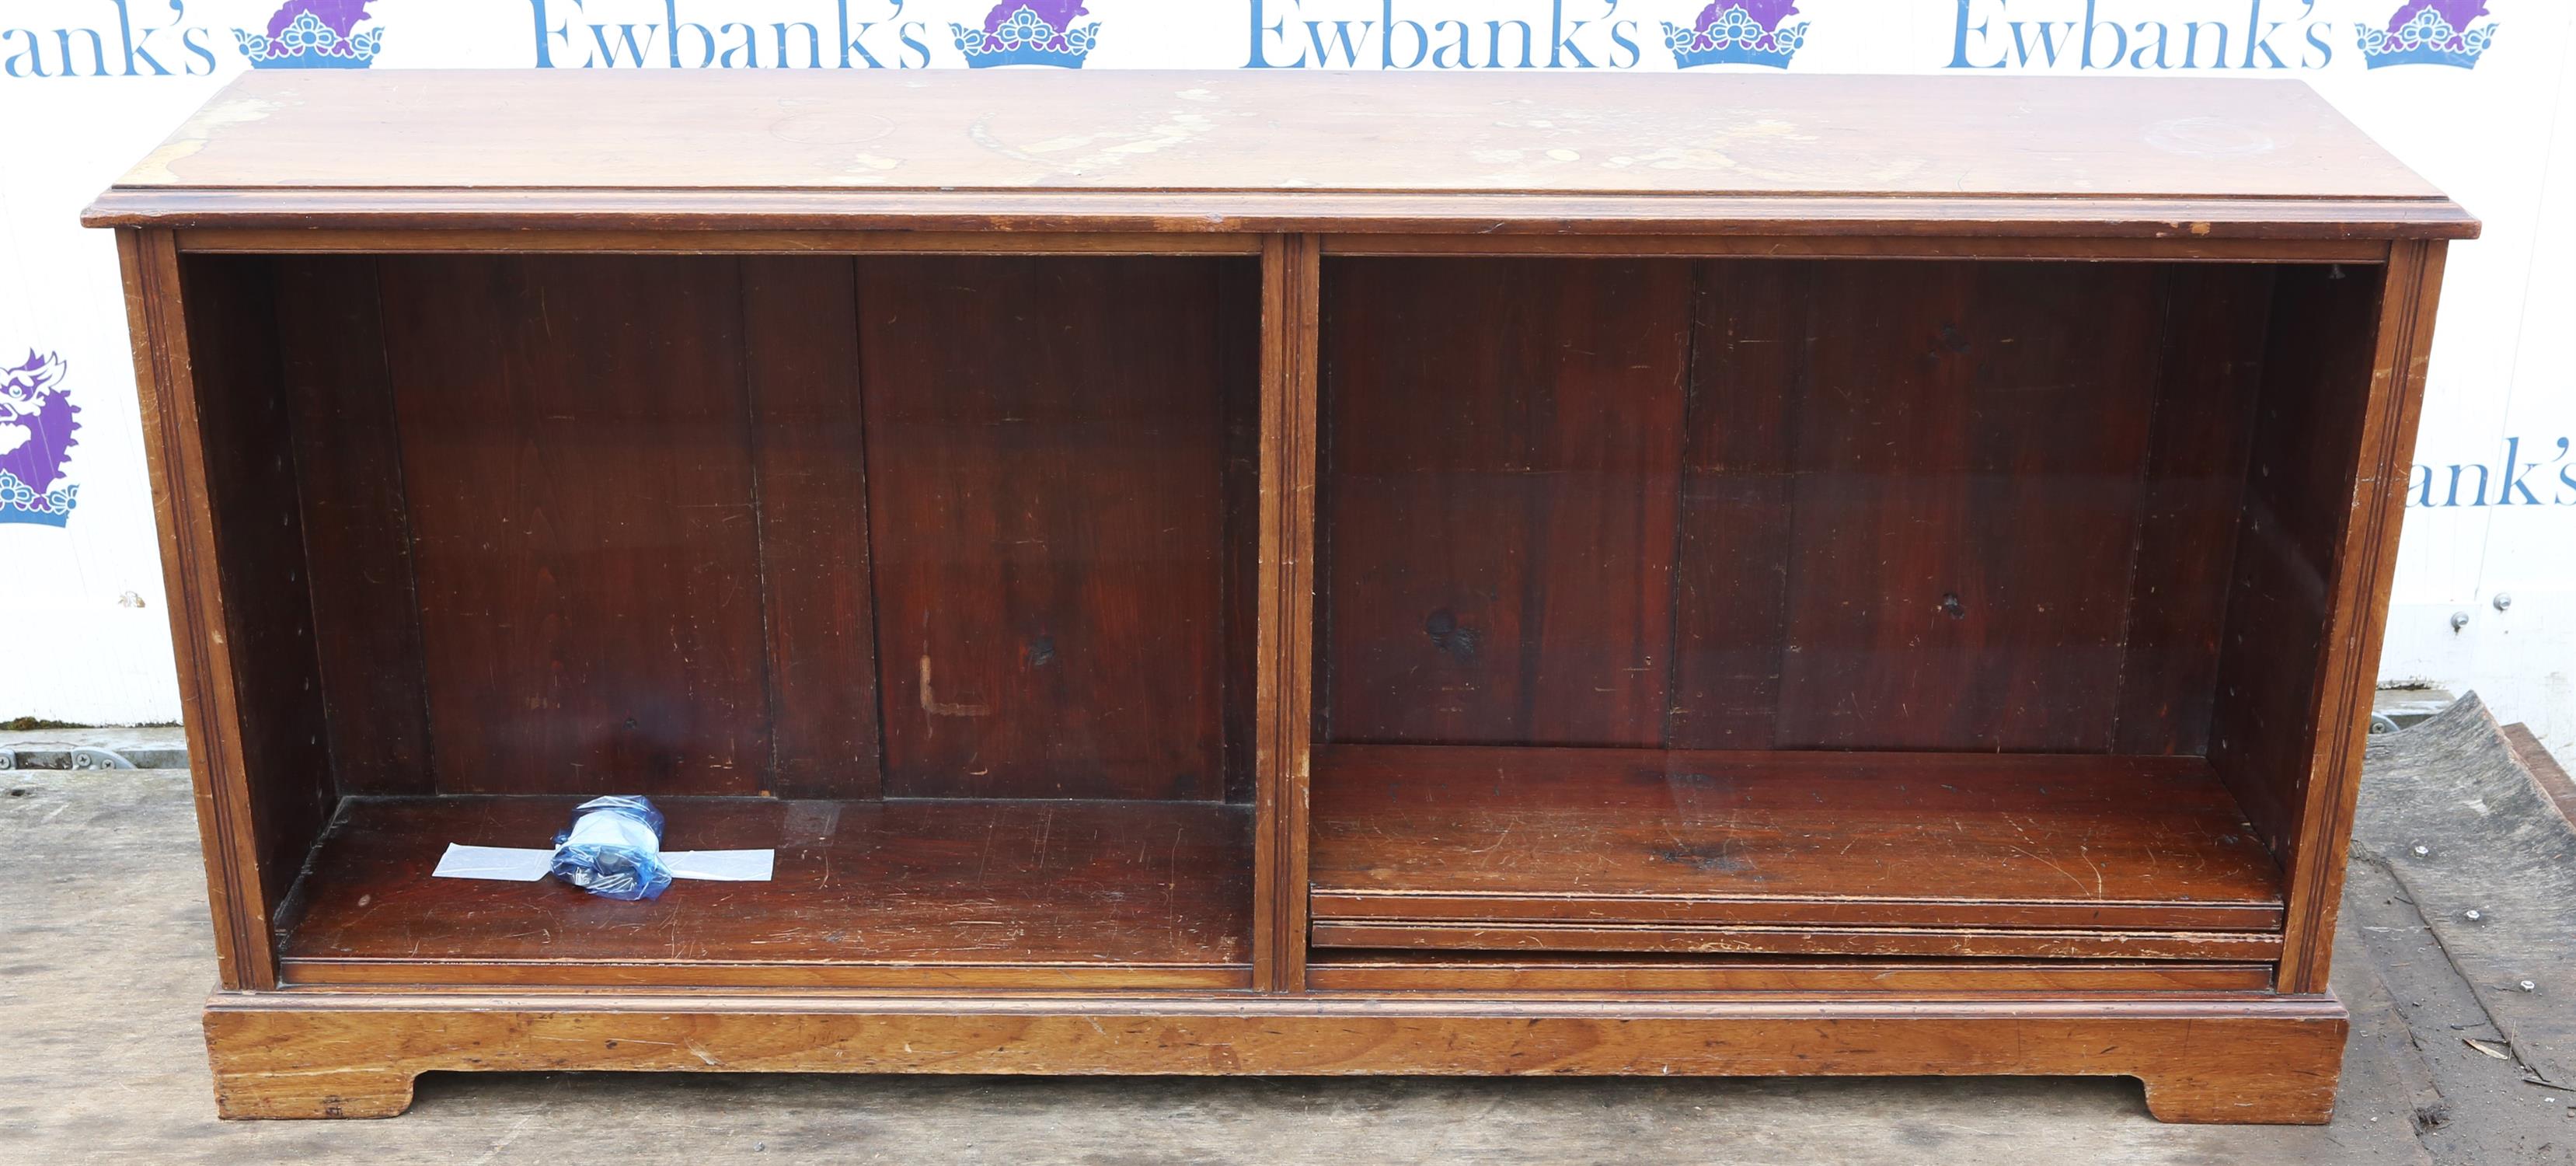 Mahogany low bookcase, late 19th century, with two adjustable shelves, on plinth base,